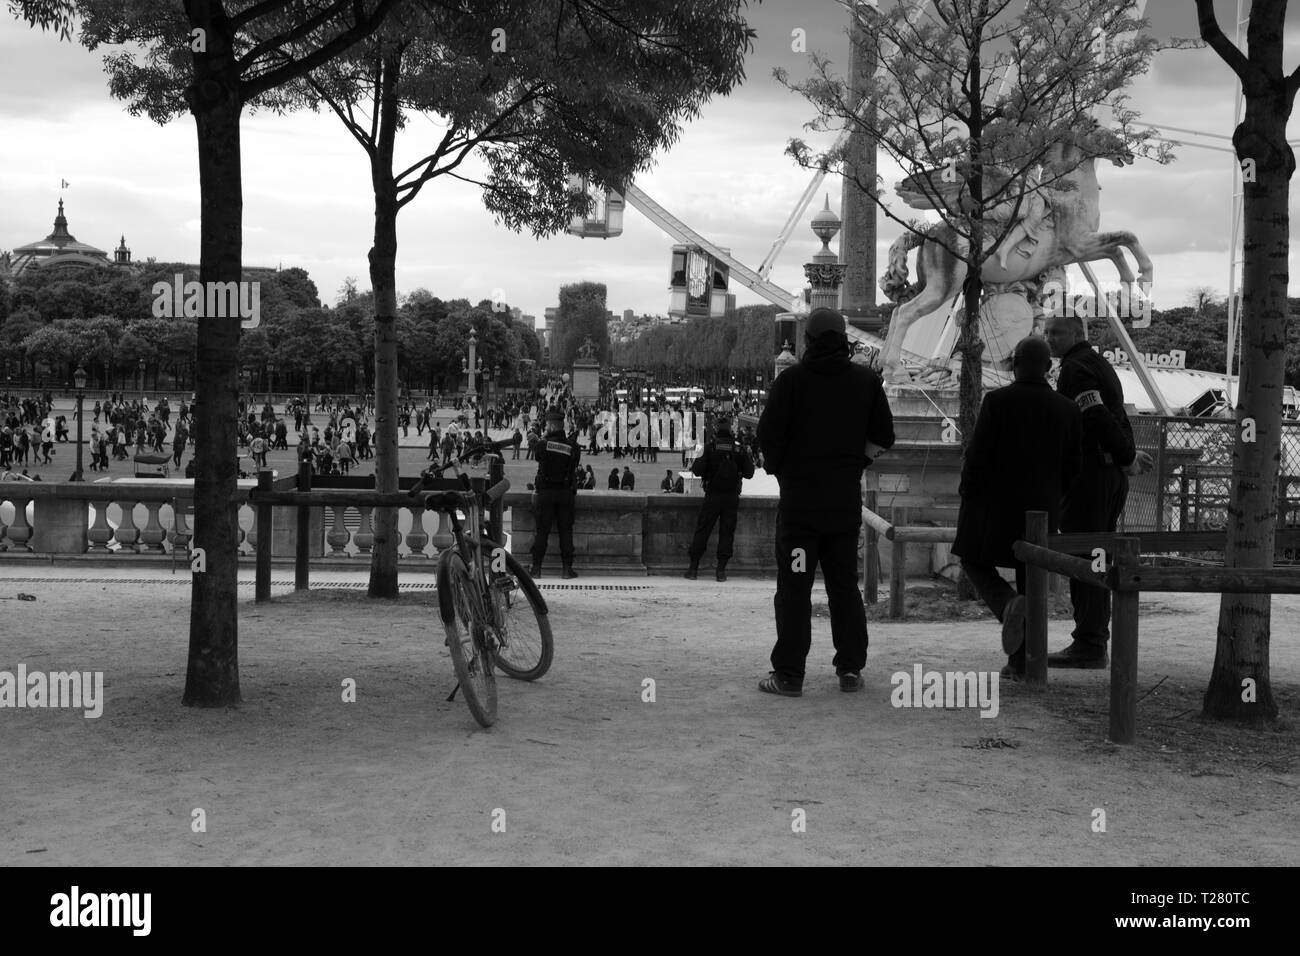 Security officers monitoring civilian gathering, Paris France Stock Photo